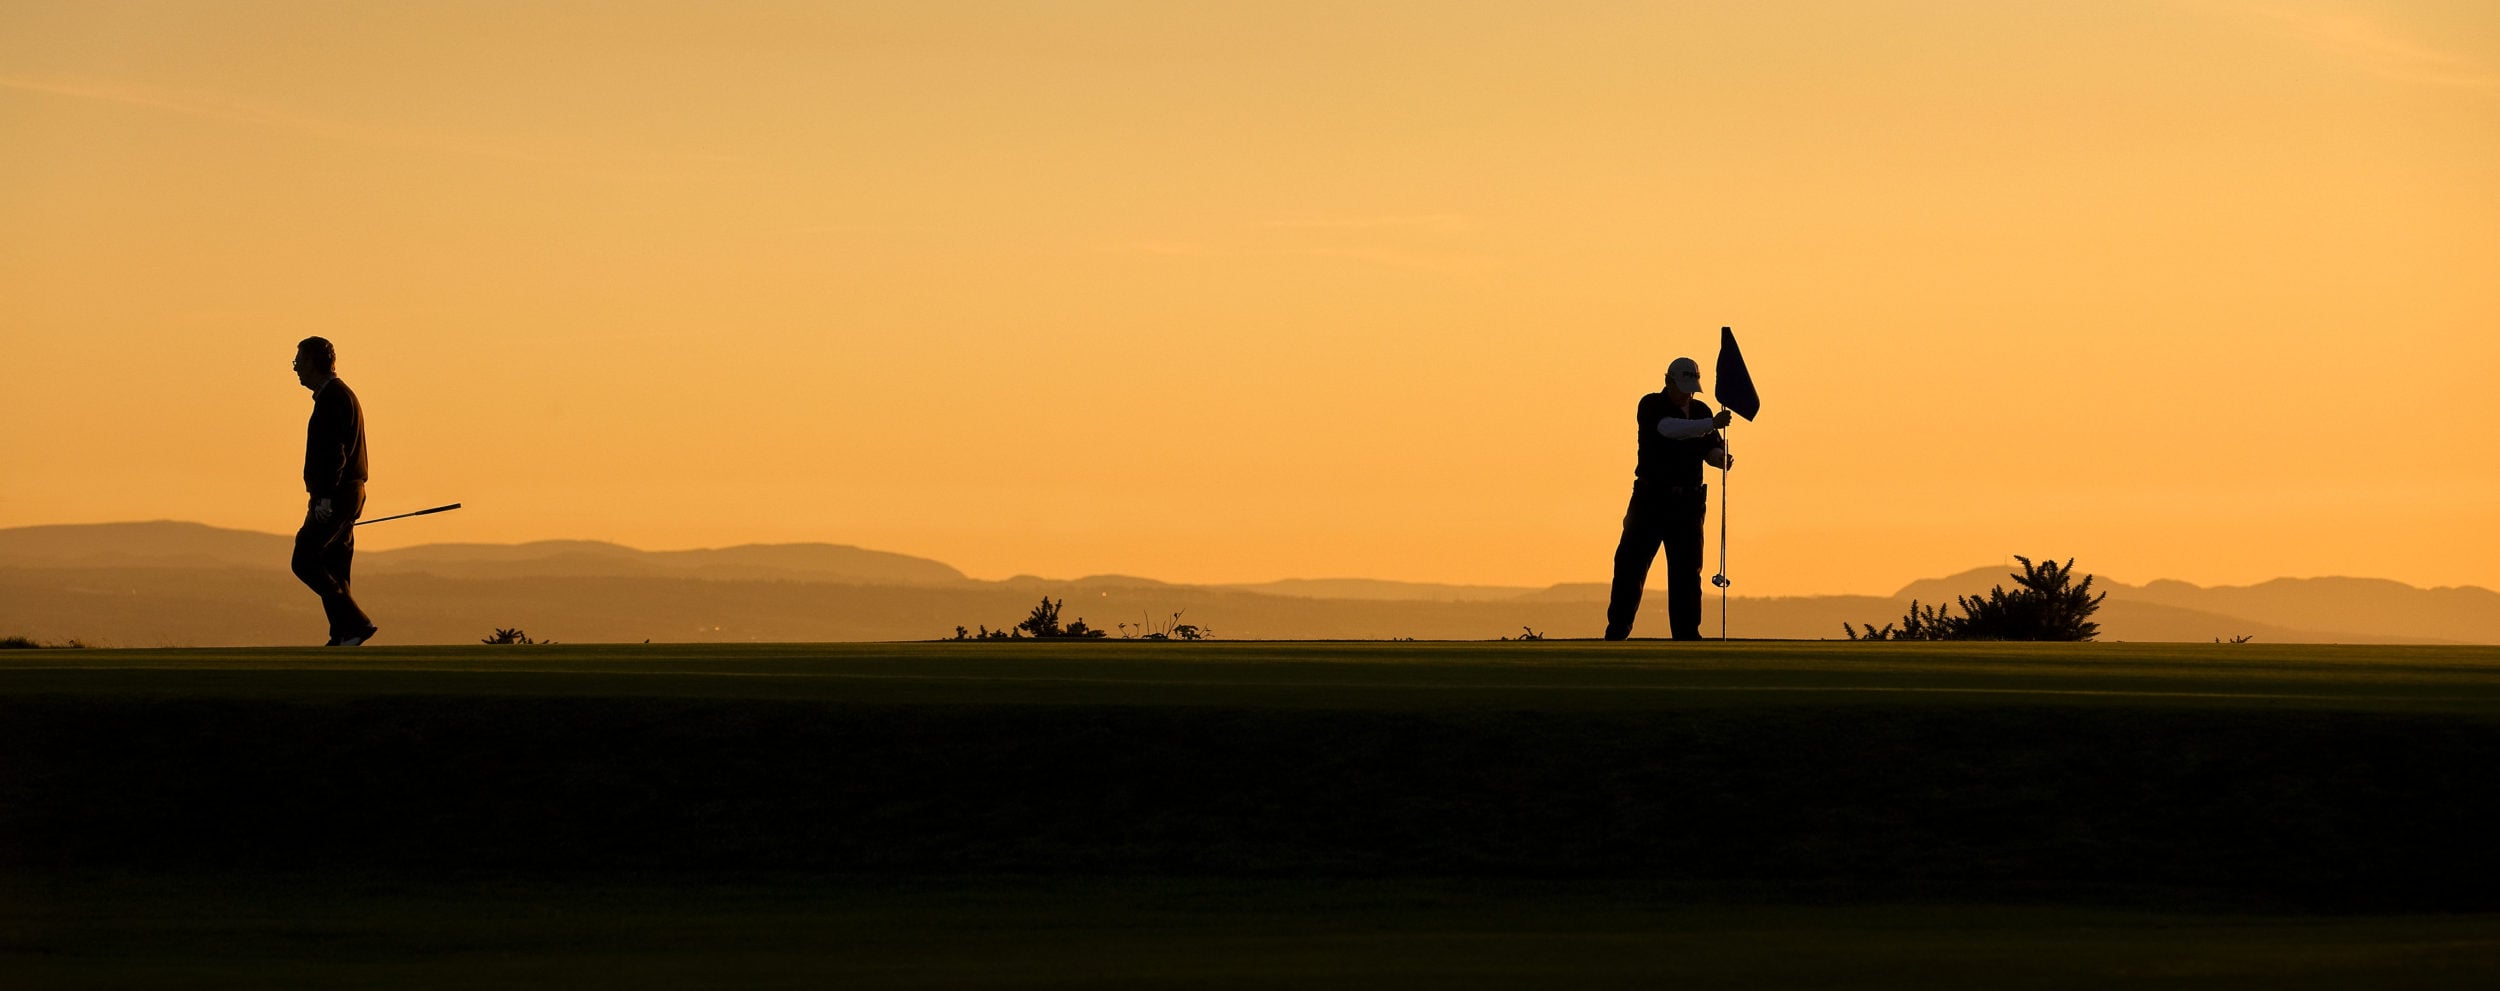 Dusk image of two golfers on the putting green at Fortrose and Rosemarkie golf Links, Inverness, Scotland